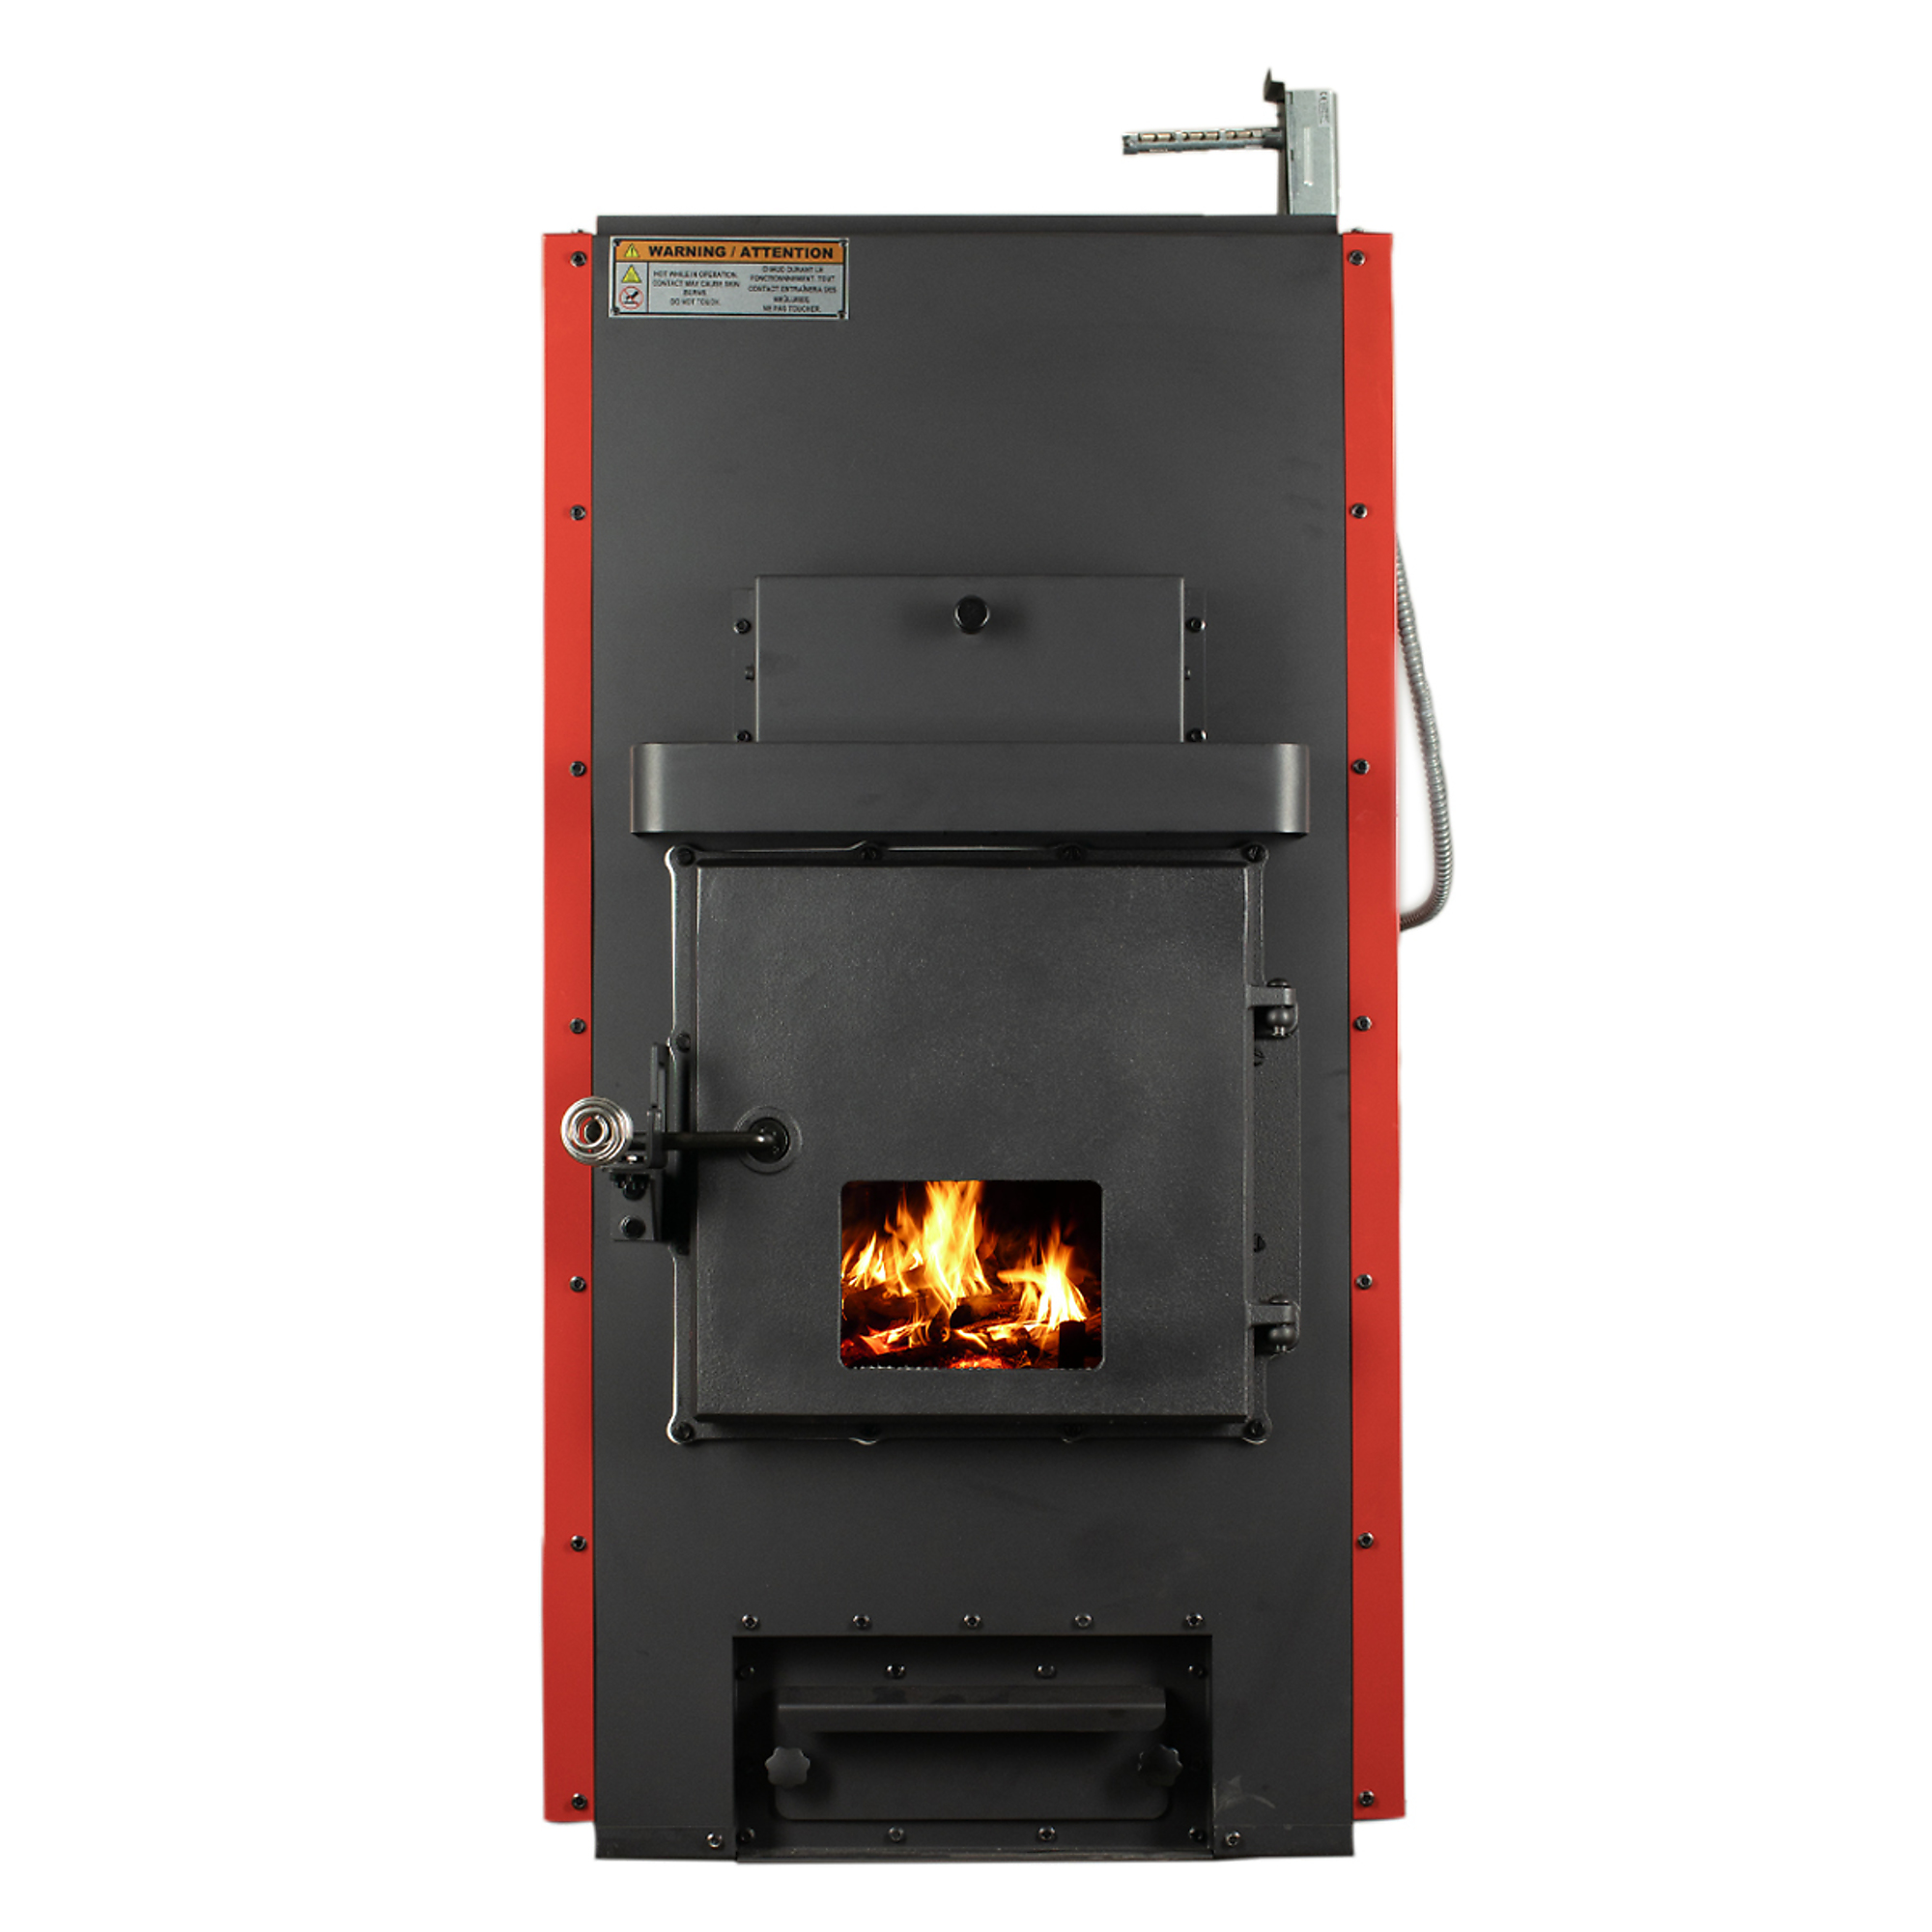 Hot Blast Wood Furnace, Heat Output 180000 Btu/hour, Heating Capability 3500 ft², Color Family Red, Model - US Stove Company HB1520